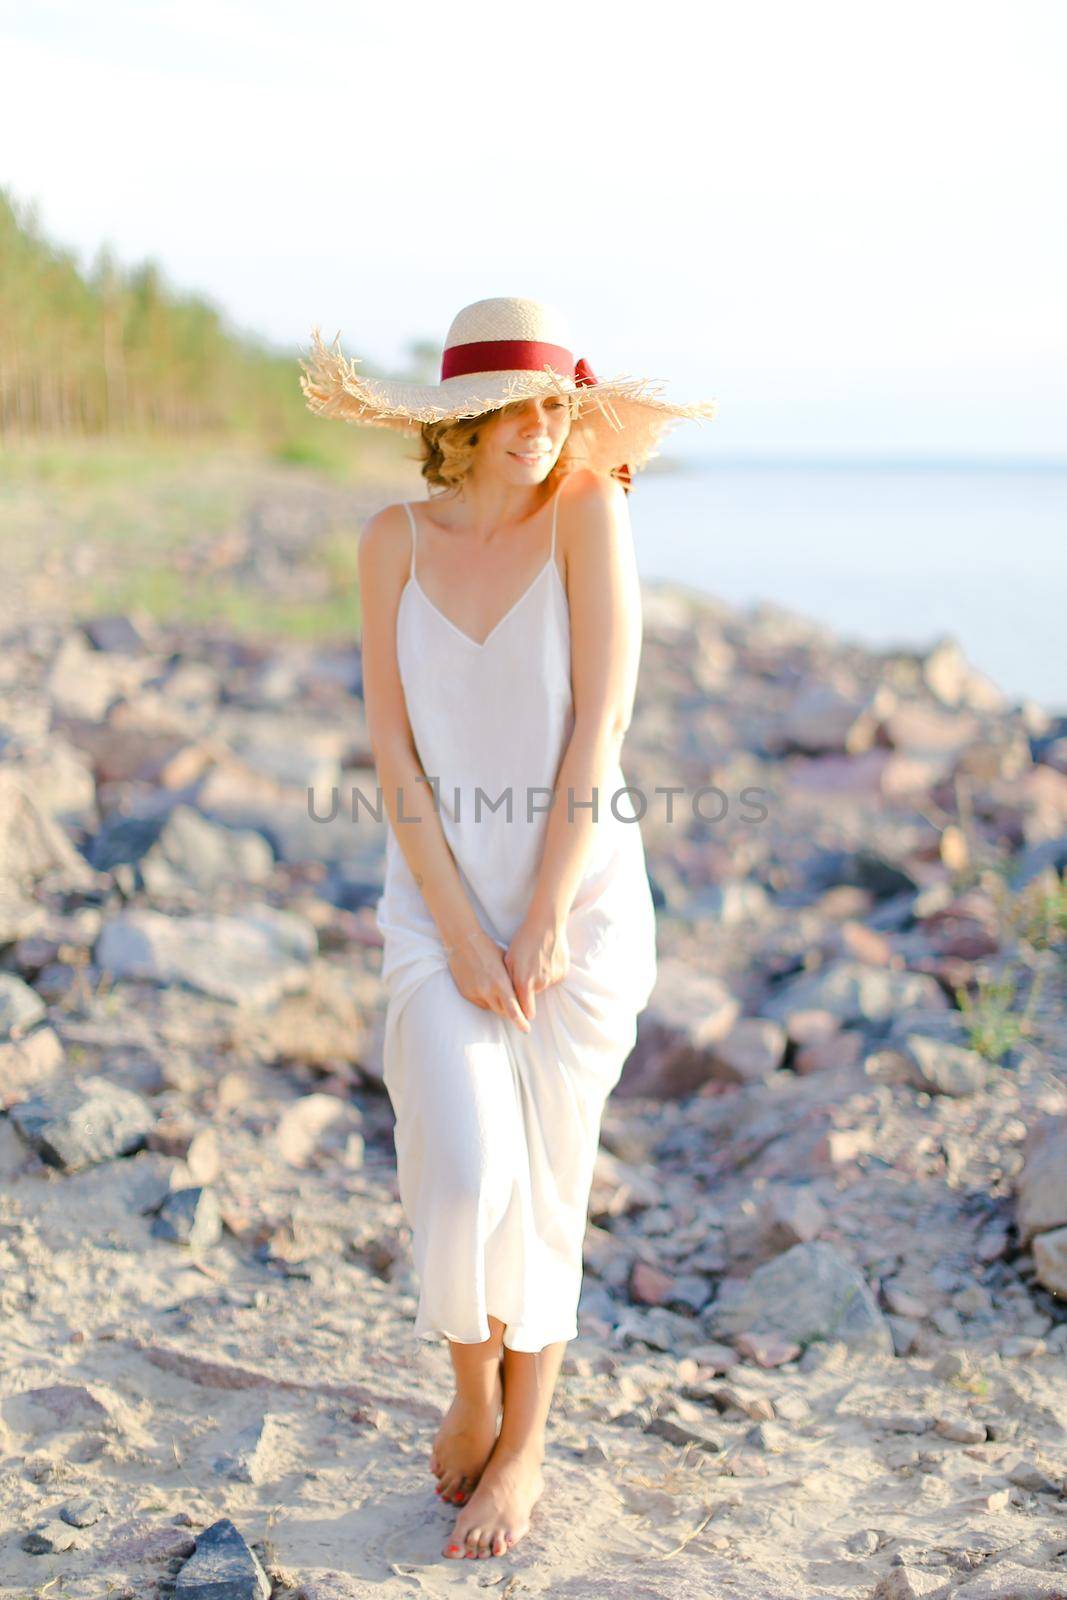 Young woman in white dress and hat with red ribbon standing on shingle beach. Concept of summer vacations and resort.